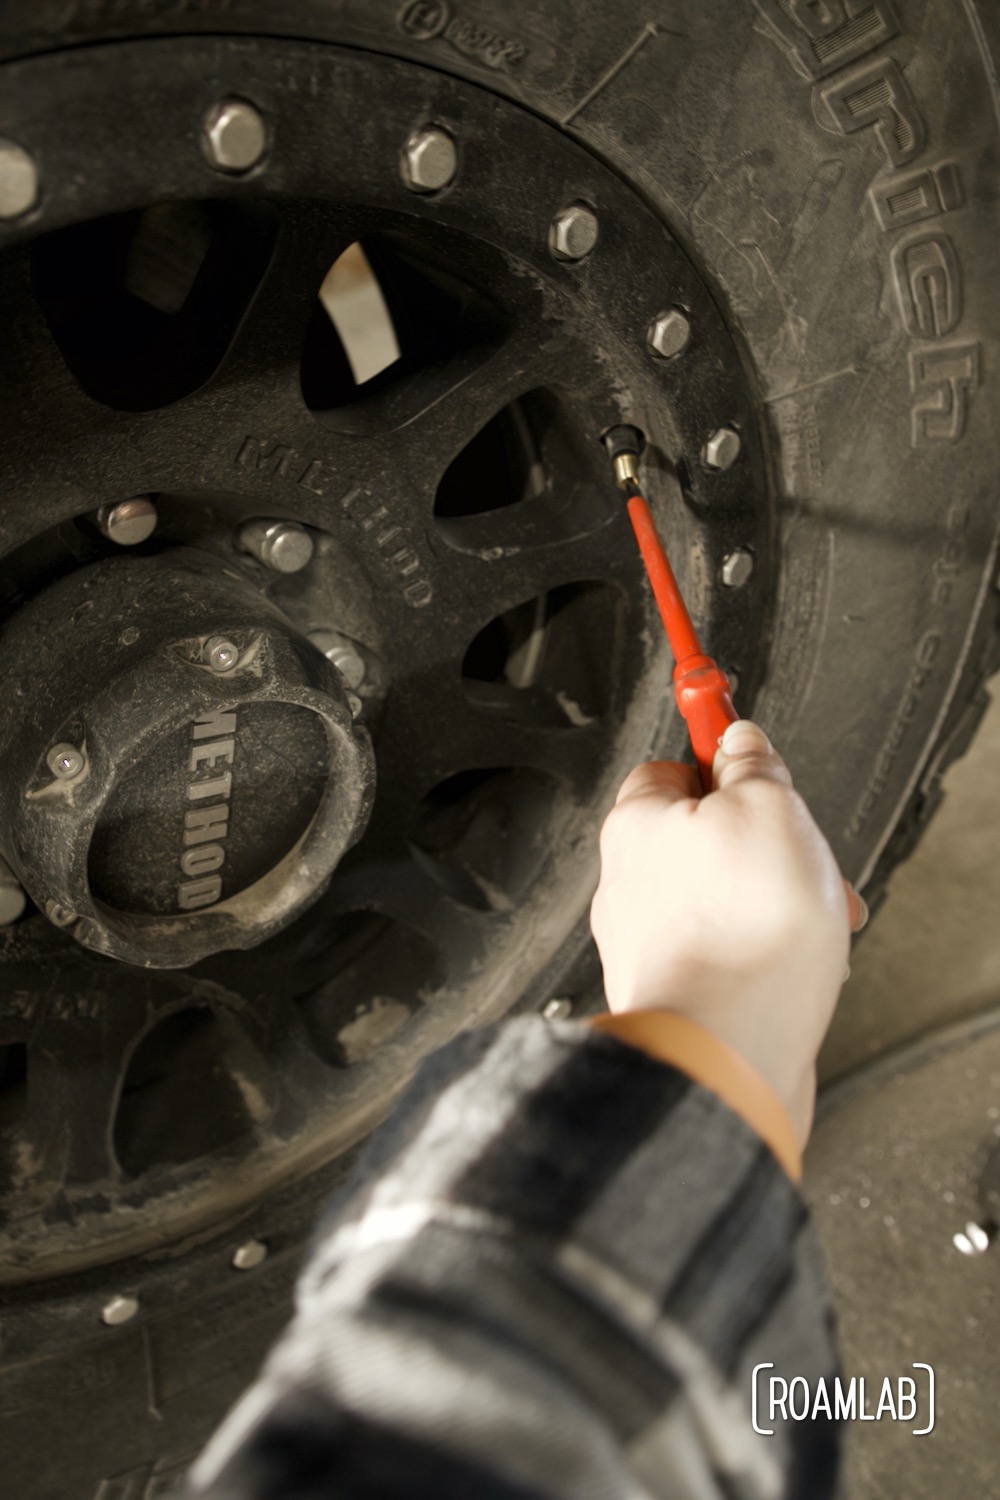 Hand using a screwdriver to air down tires.